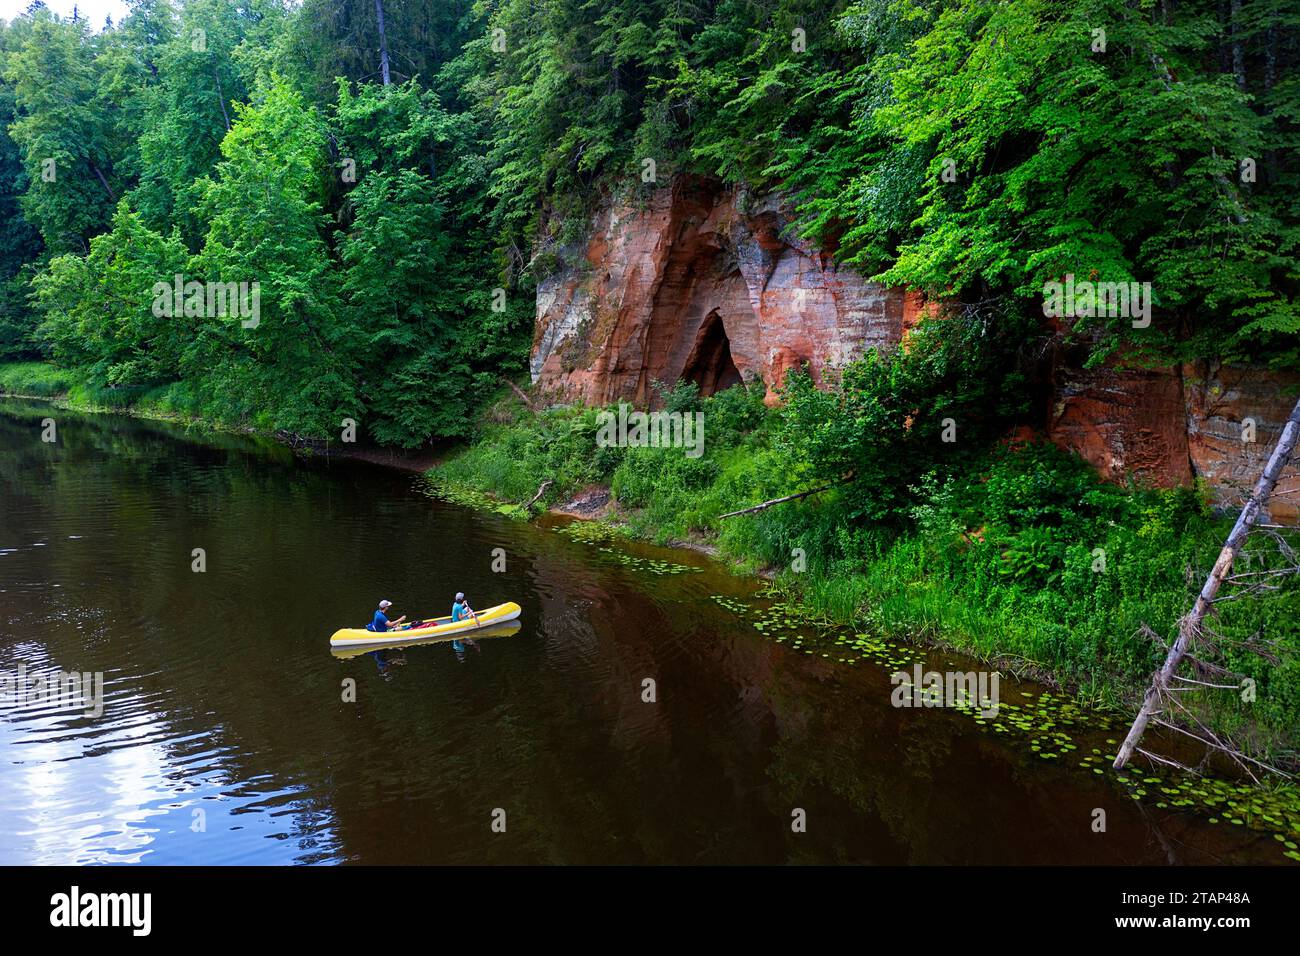 Tourists on a canoe, boat trip on Salaca river, exploring spectacular nature, Devonian red sandstone cliffs, caves and lush forests, Mazsalaca, Latvia Stock Photo